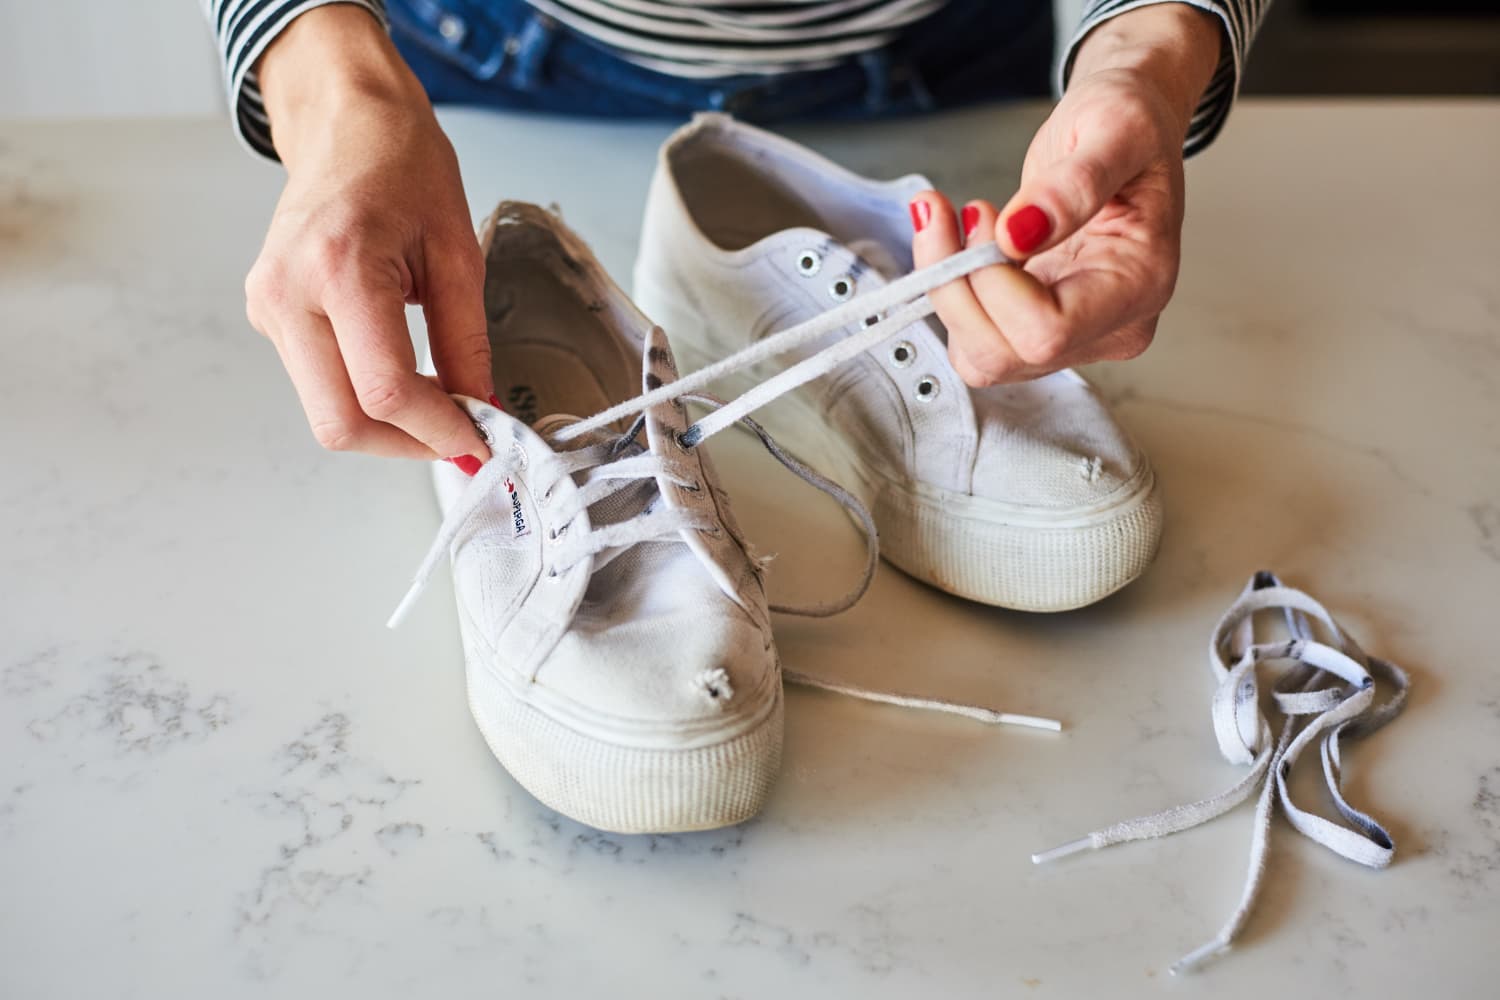 8 Best How to clean white sneakers ideas  how to clean white sneakers, white  sneakers, how to clean white shoes